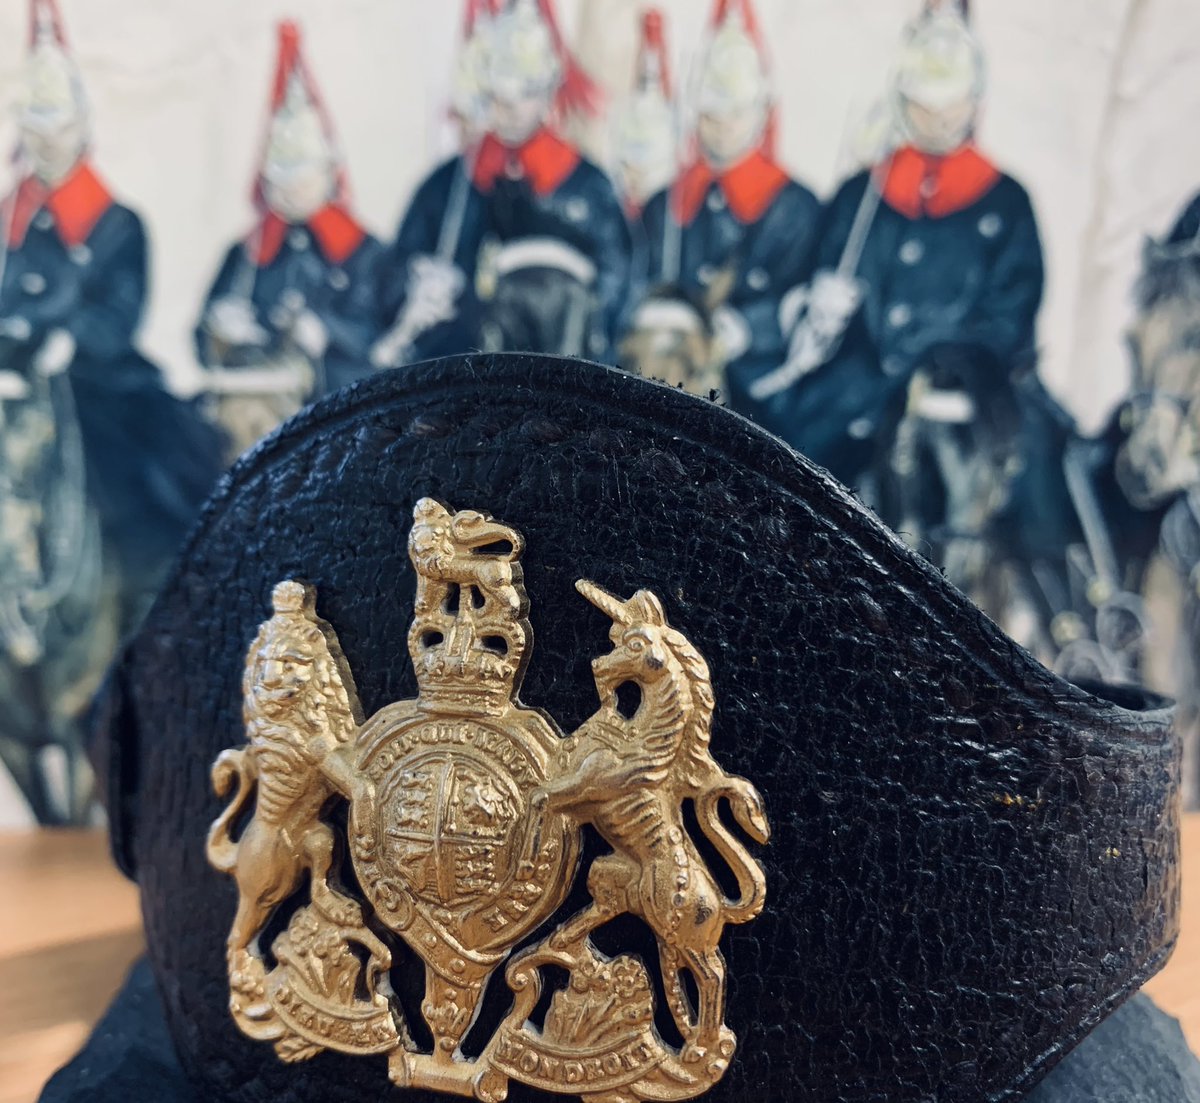 Congratulations to all those selected for promotion to WO1. A further and more personal message of well done to those from @HCav1660 who have achieved the pinnacle rank of Warrant Officer Class 1. #trustedGuardians #familyRegiment #Congrats